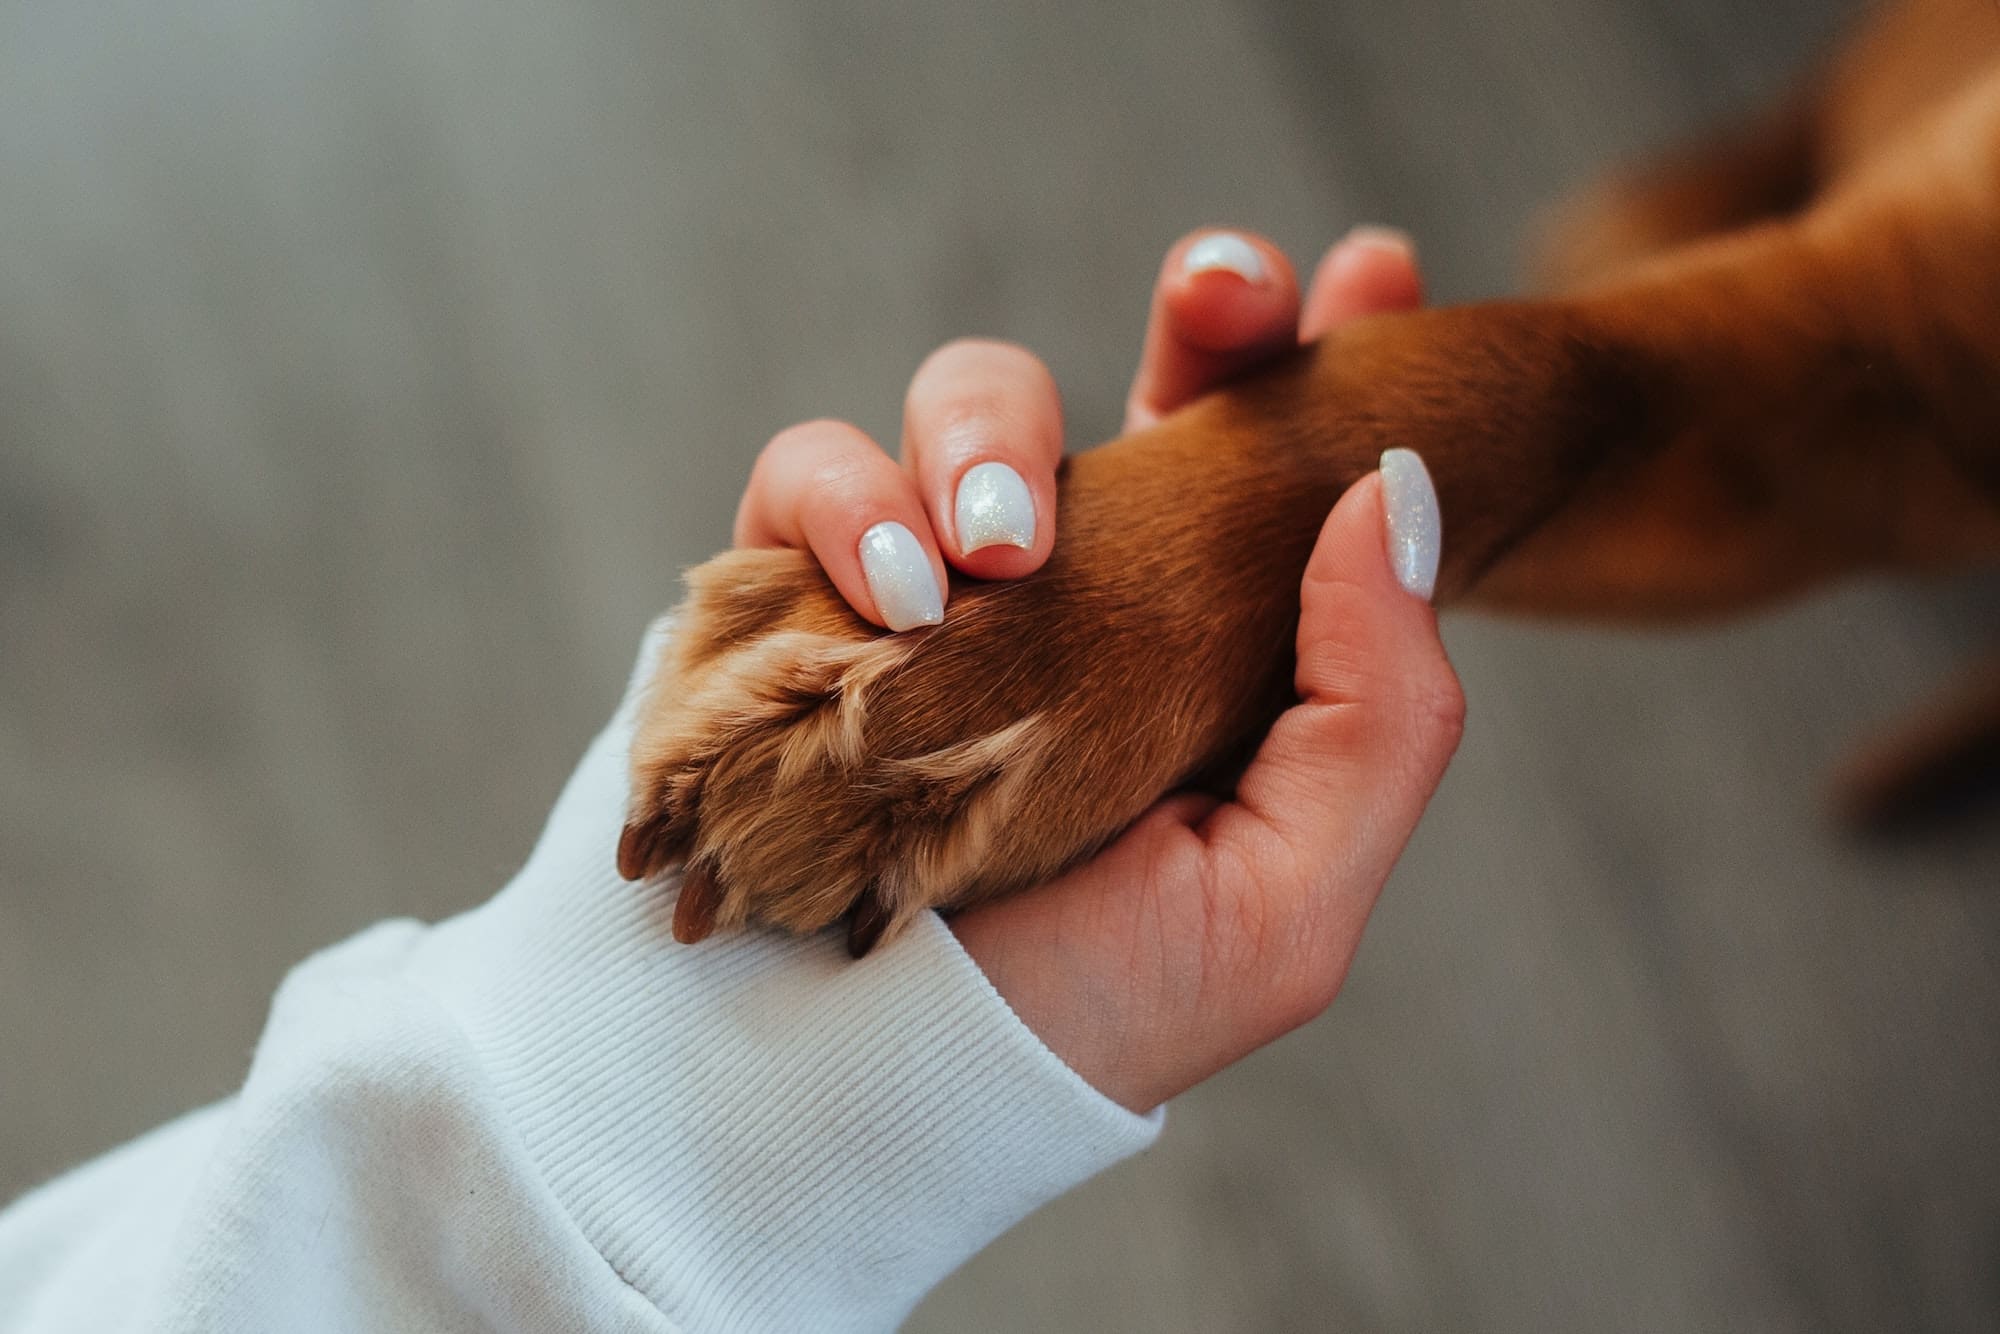 Photo of woman holding dog paw from Pexels by Ivan Babydov